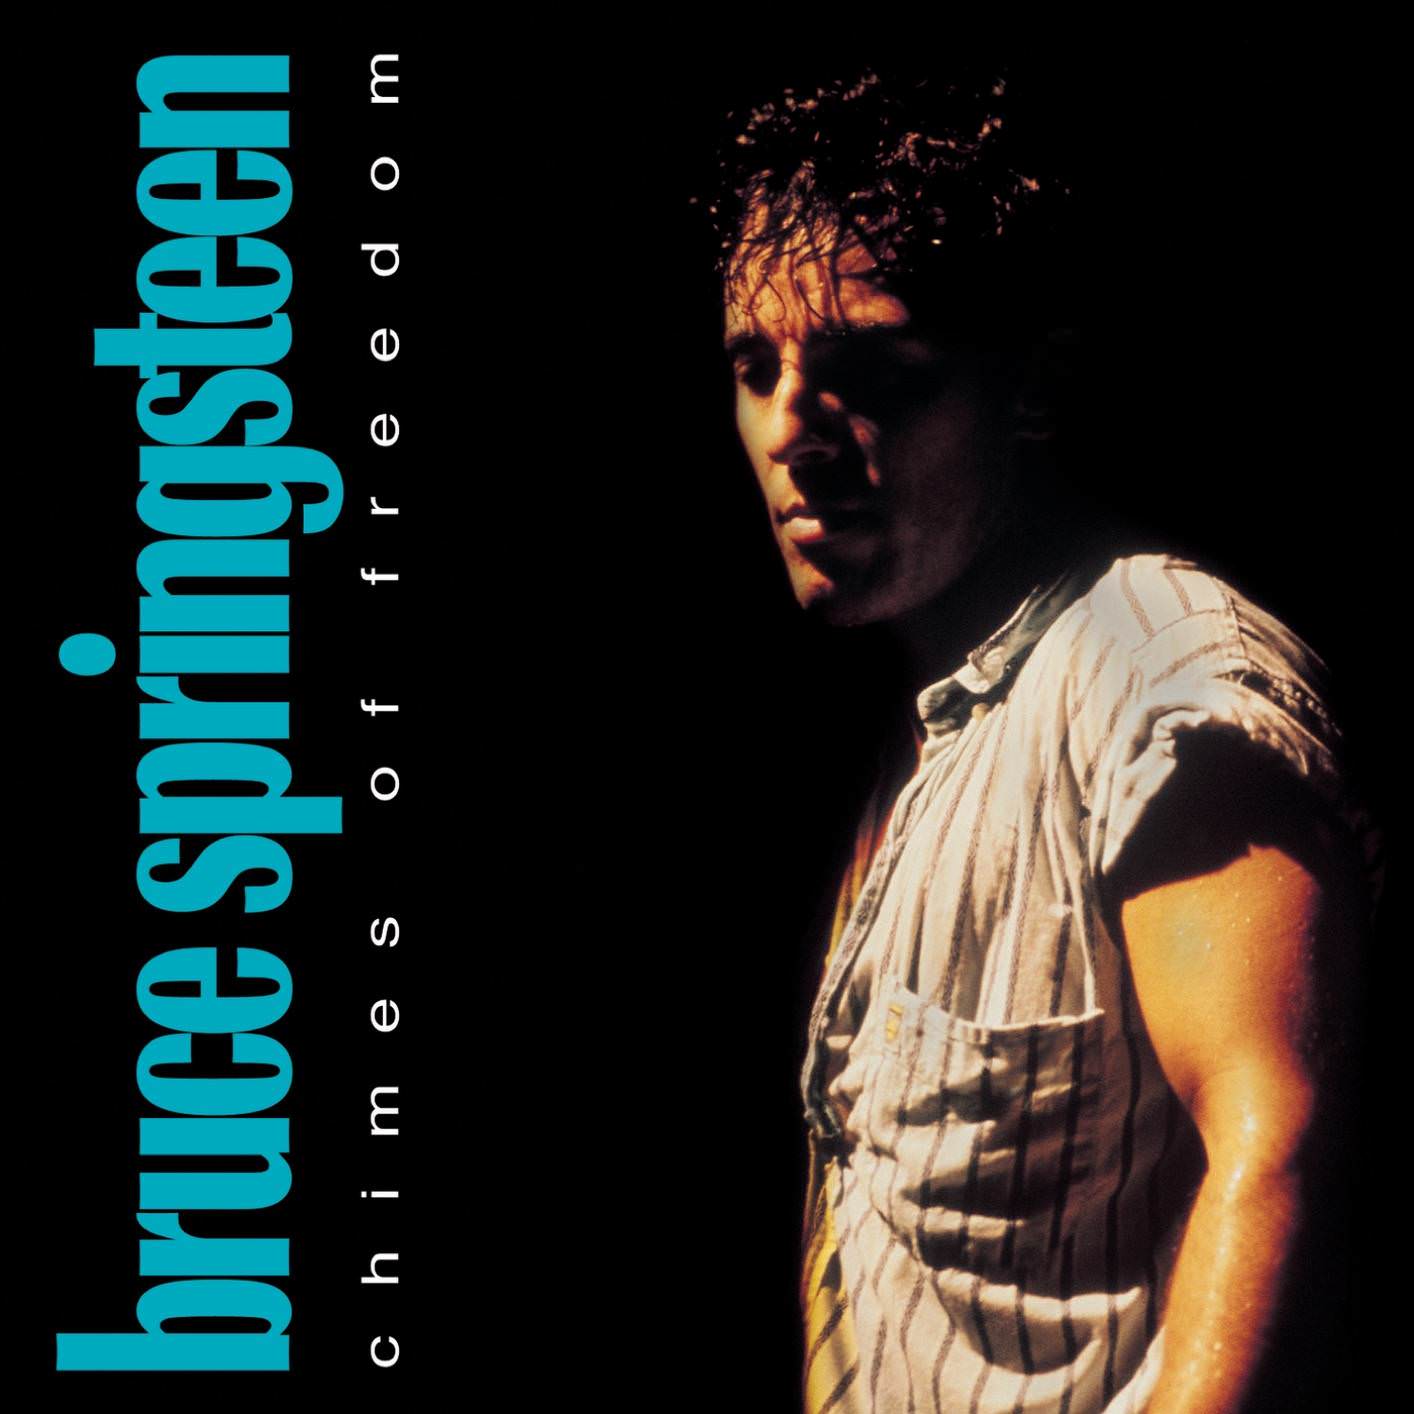 Bruce Springsteen – Chimes of Freedom (Live/EP) (1988/2018) [FLAC 24bit/96kHz]